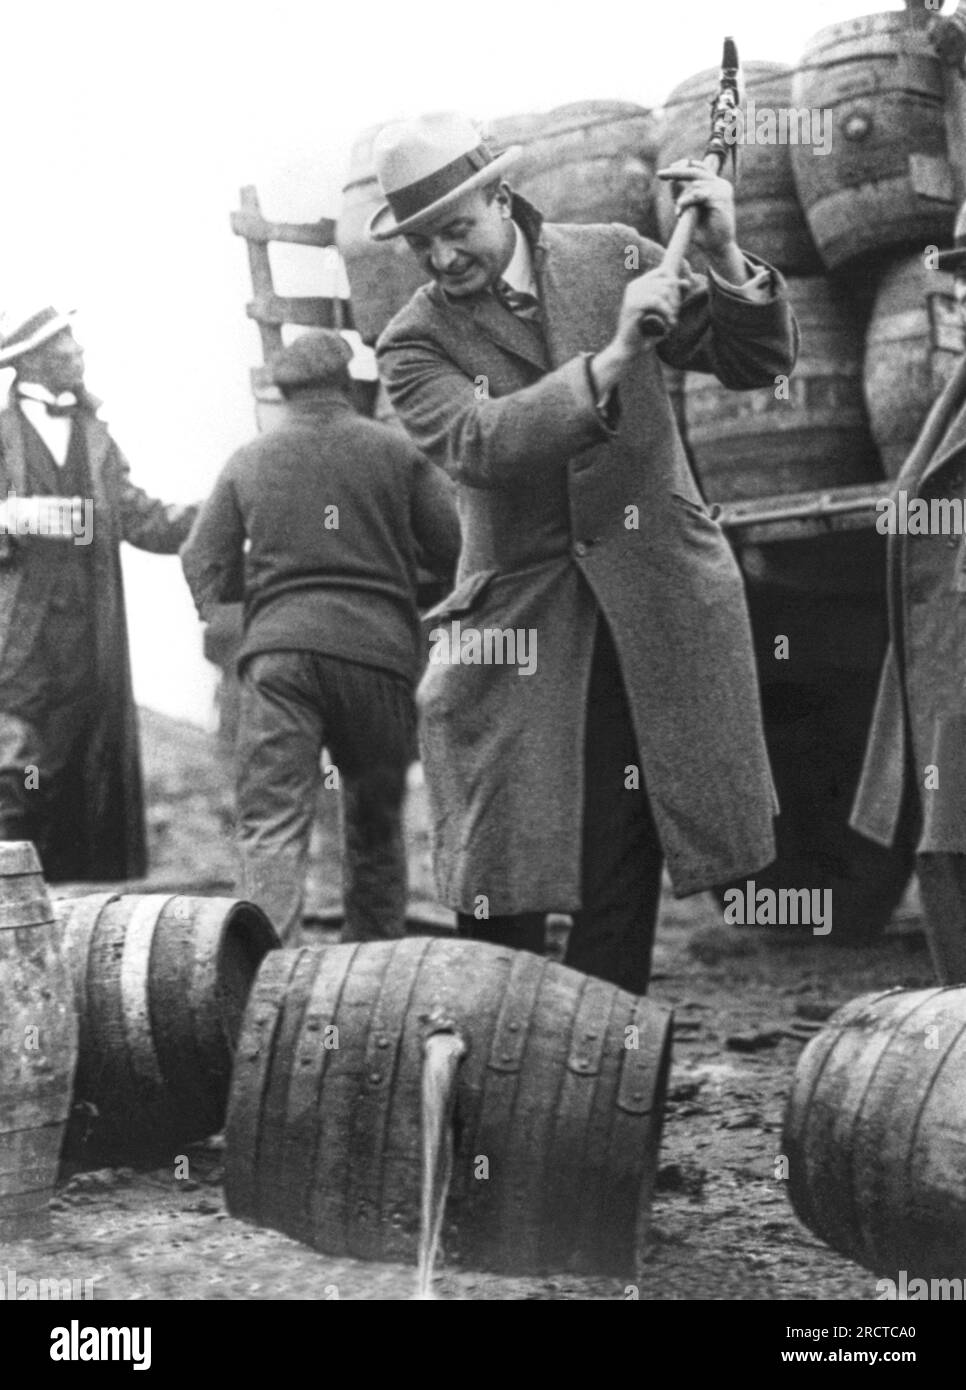 Philadelphia, Pennsylvania:  December, 1924 Public Safety Director Smedley D. 'Duckboards' Butler destroying barrels of beer with a pick axe during Prohibition and letting it run into the  Schuylkill River. Stock Photo